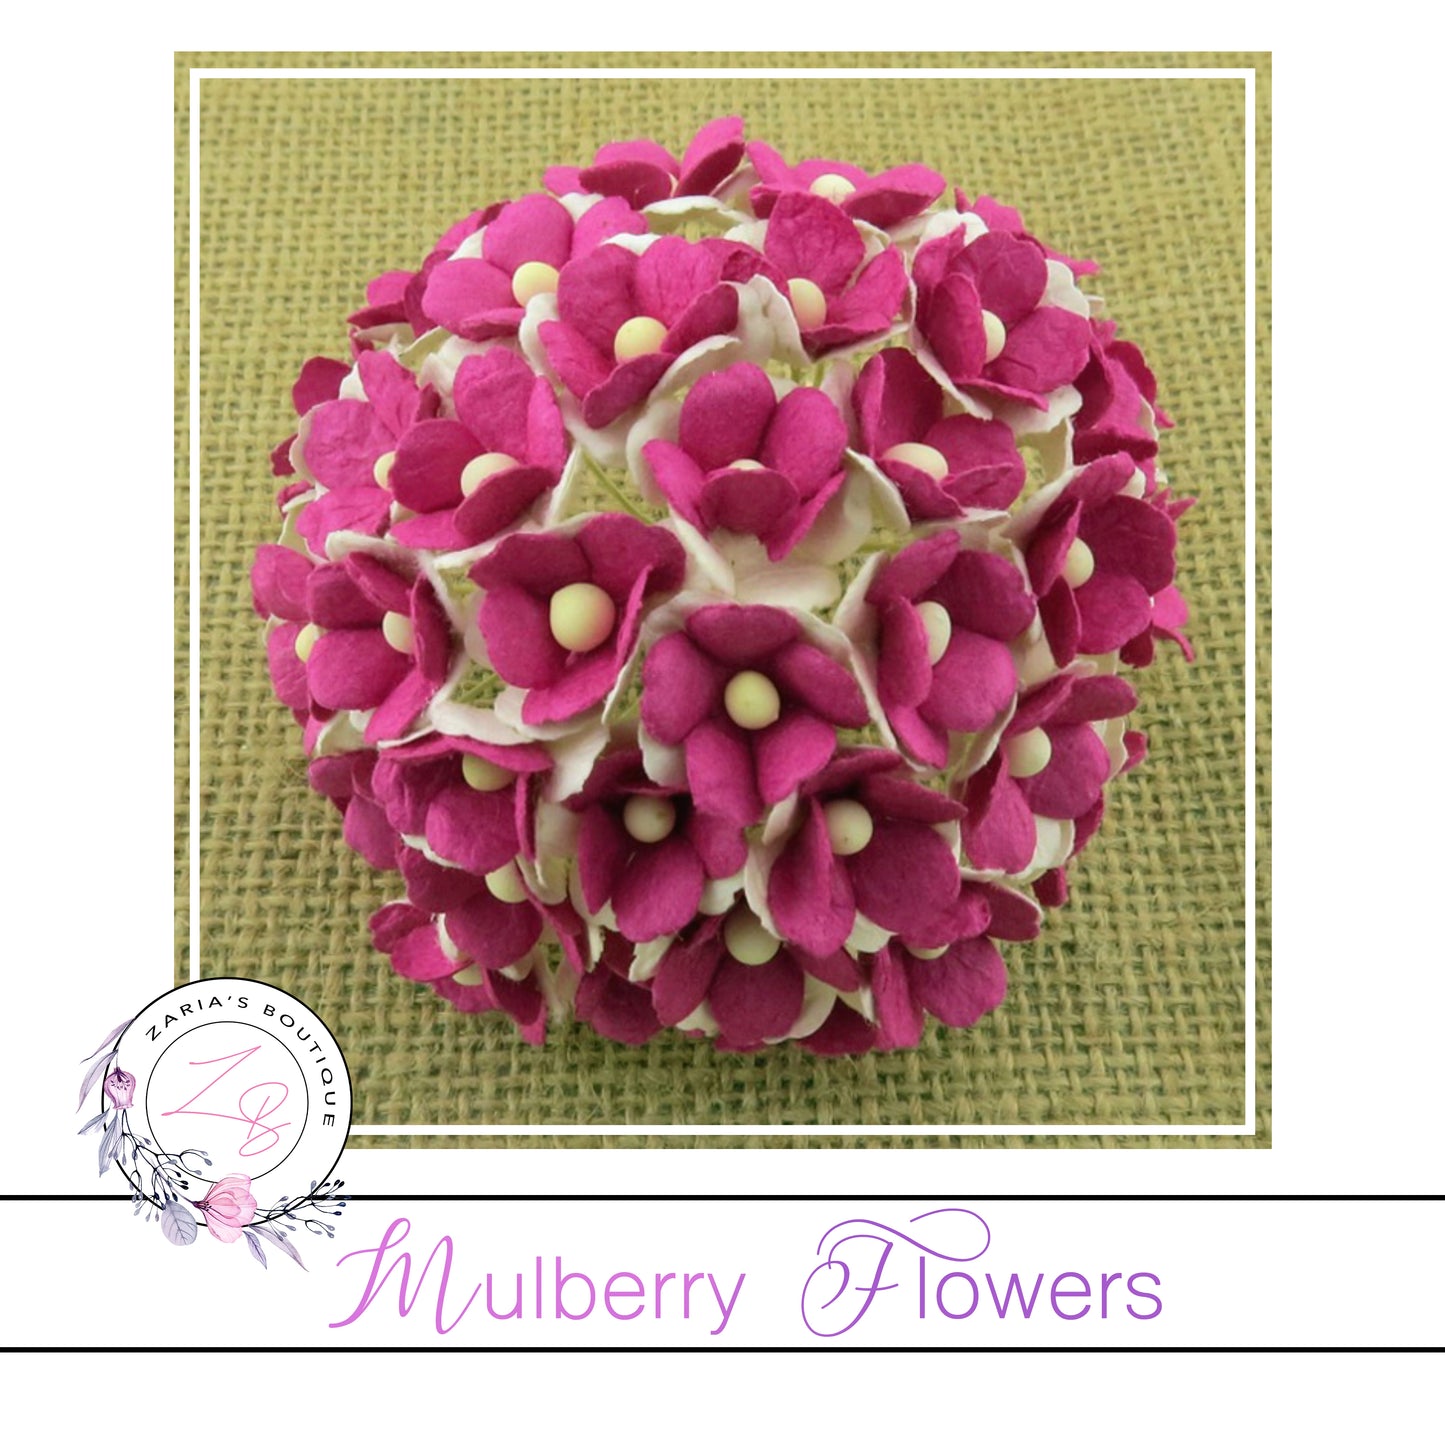 Mulberry Flowers ~ Sweetheart Blossom ~ Two-Tone Deep Pink ~ 15mm